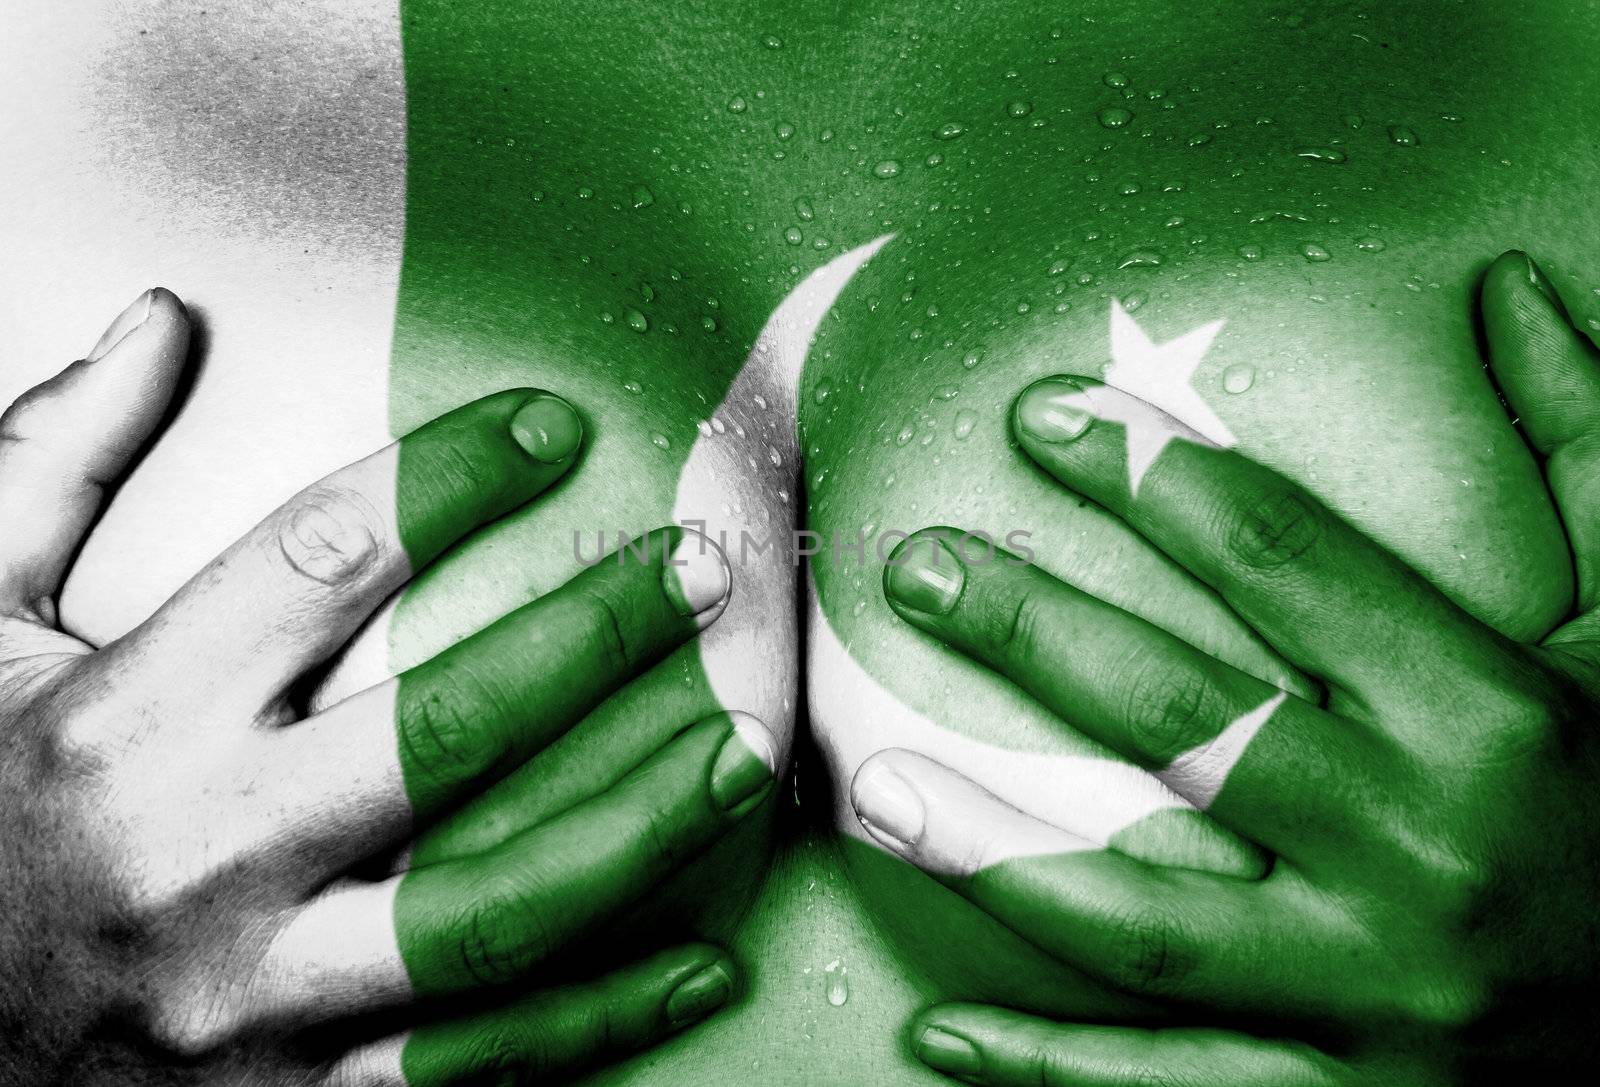 Sweaty upper part of female body, hands covering breasts, flag of Pakistan